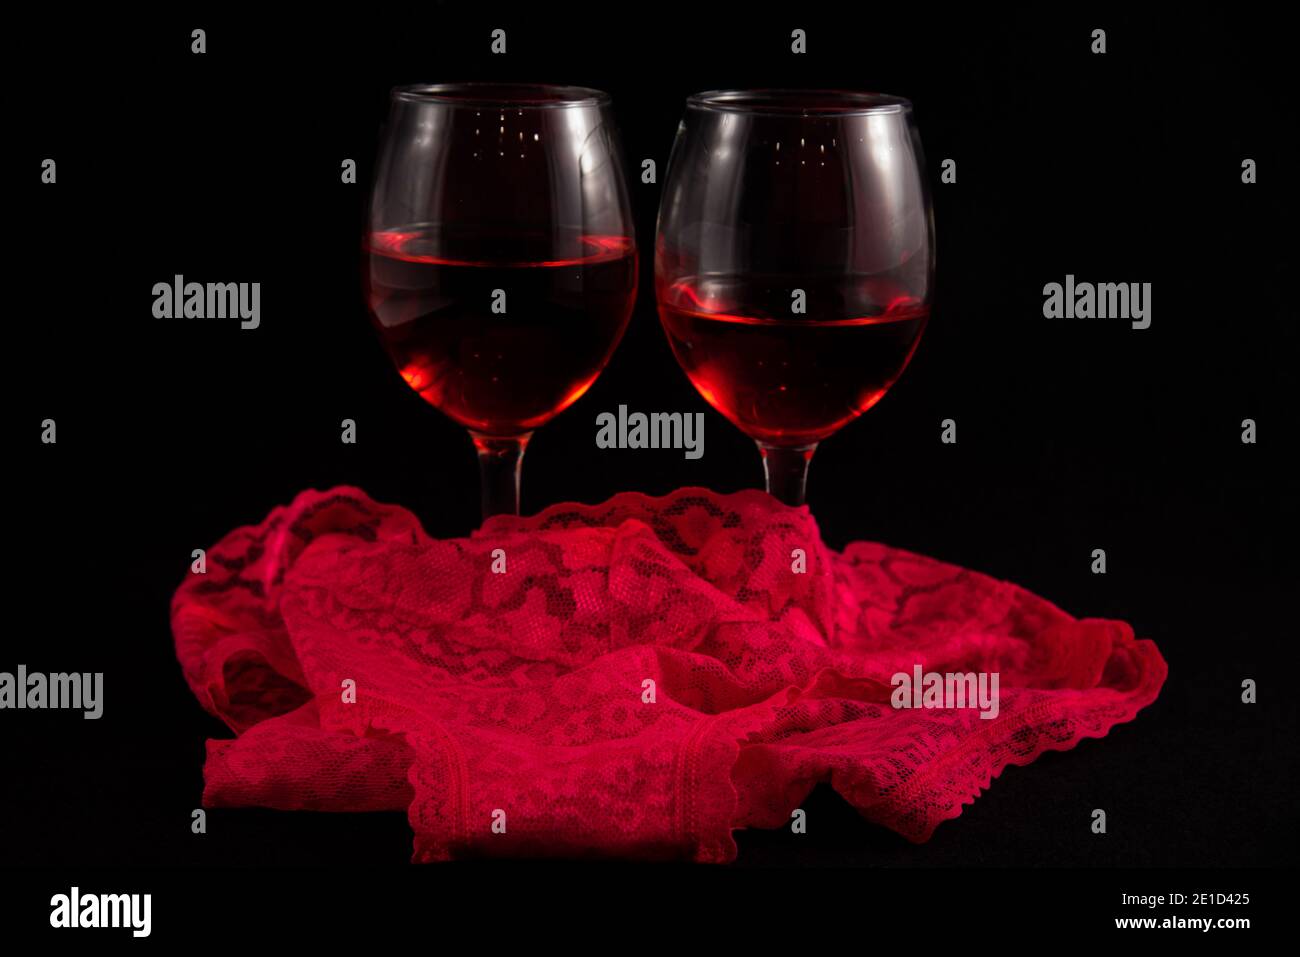 Two wine glasses with Valentines hearts against a black background. Stock Photo